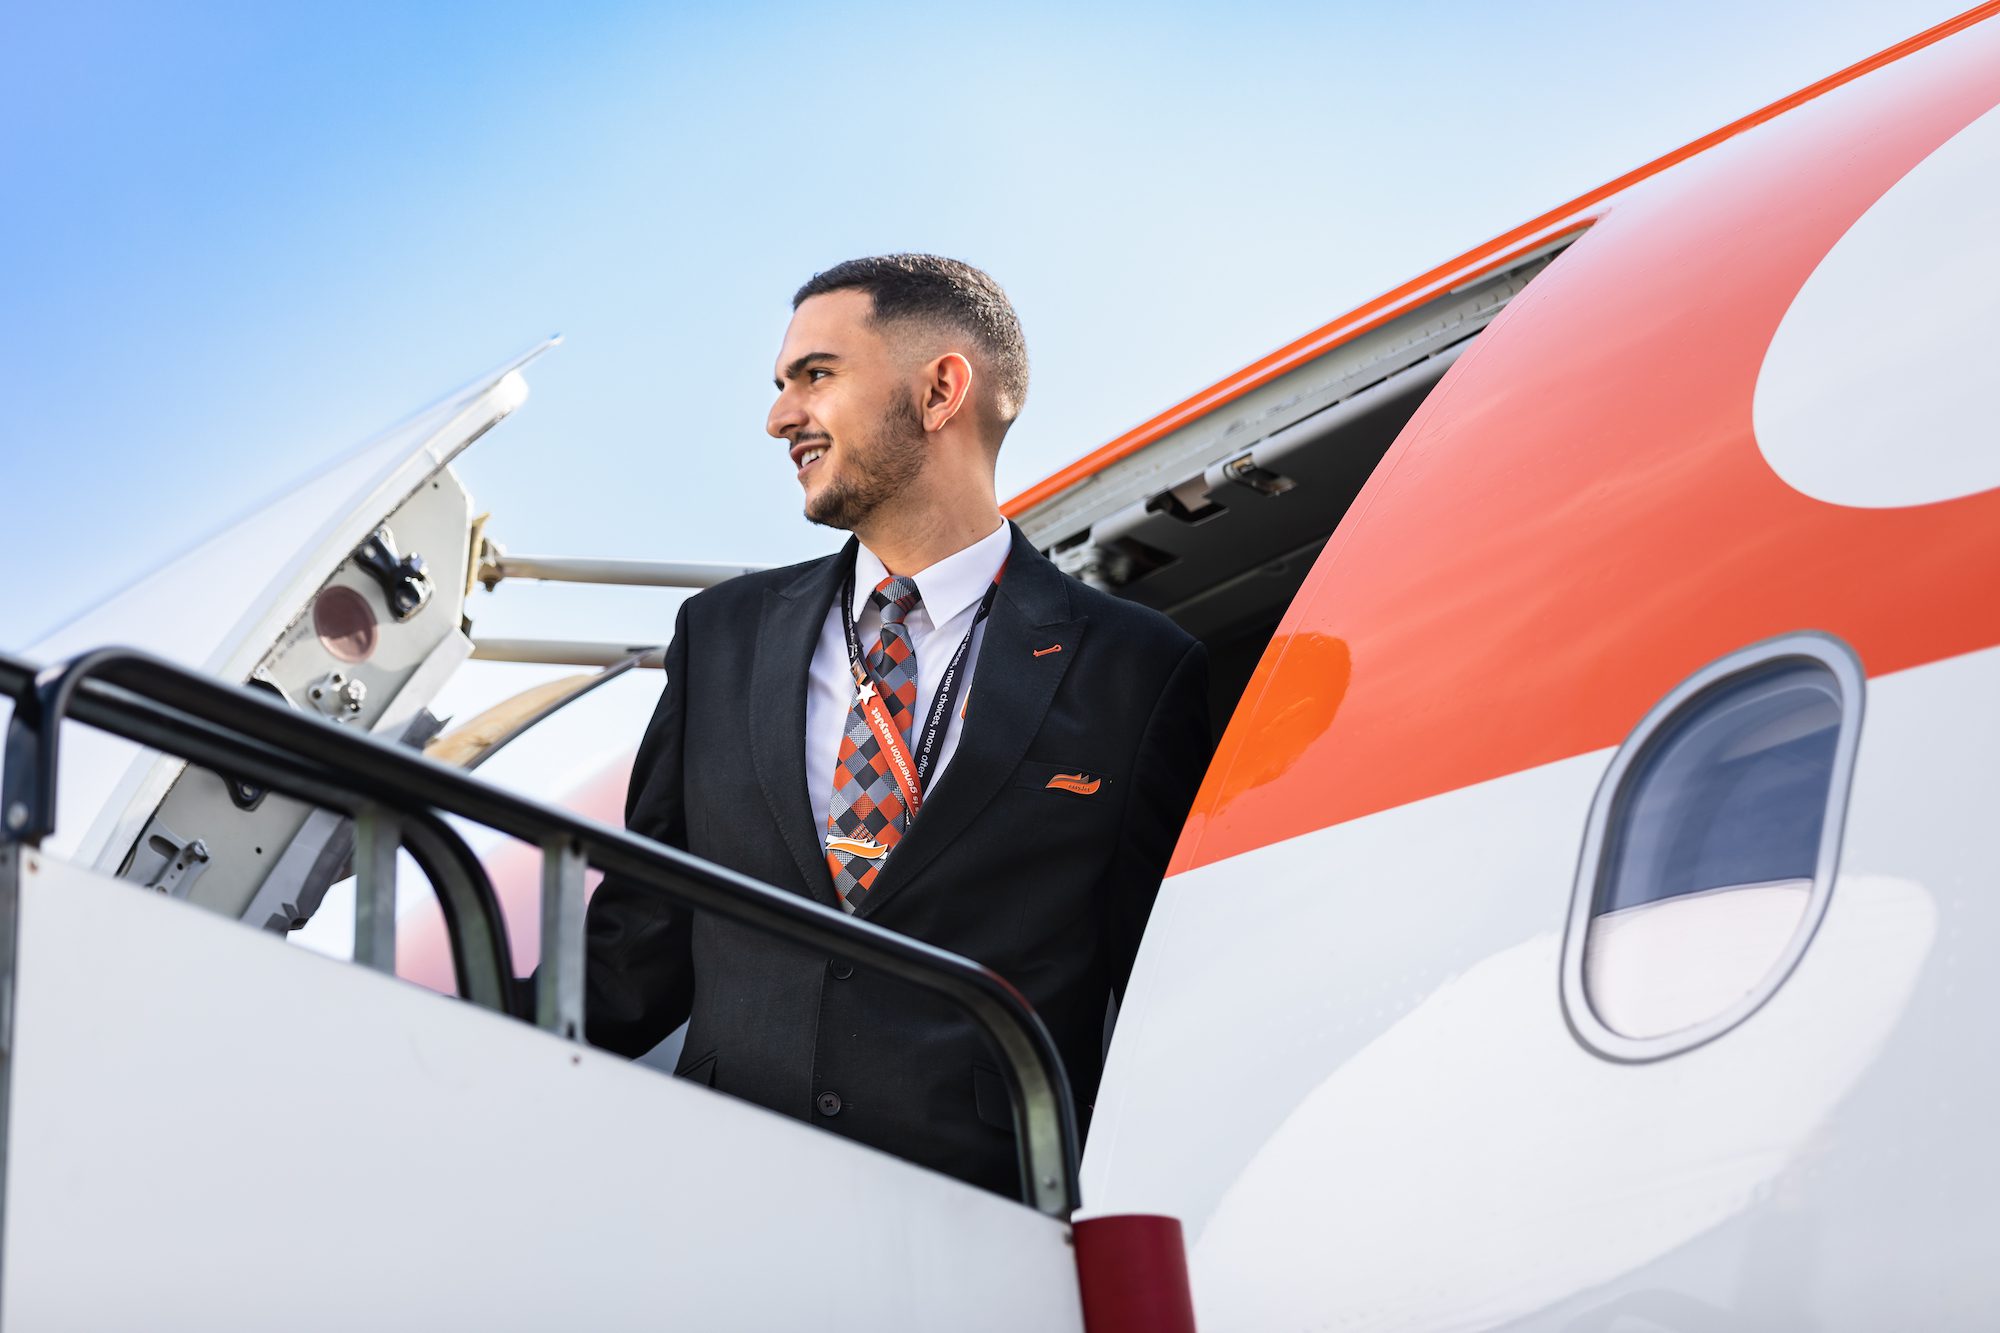 Reaching new heights with easyJet